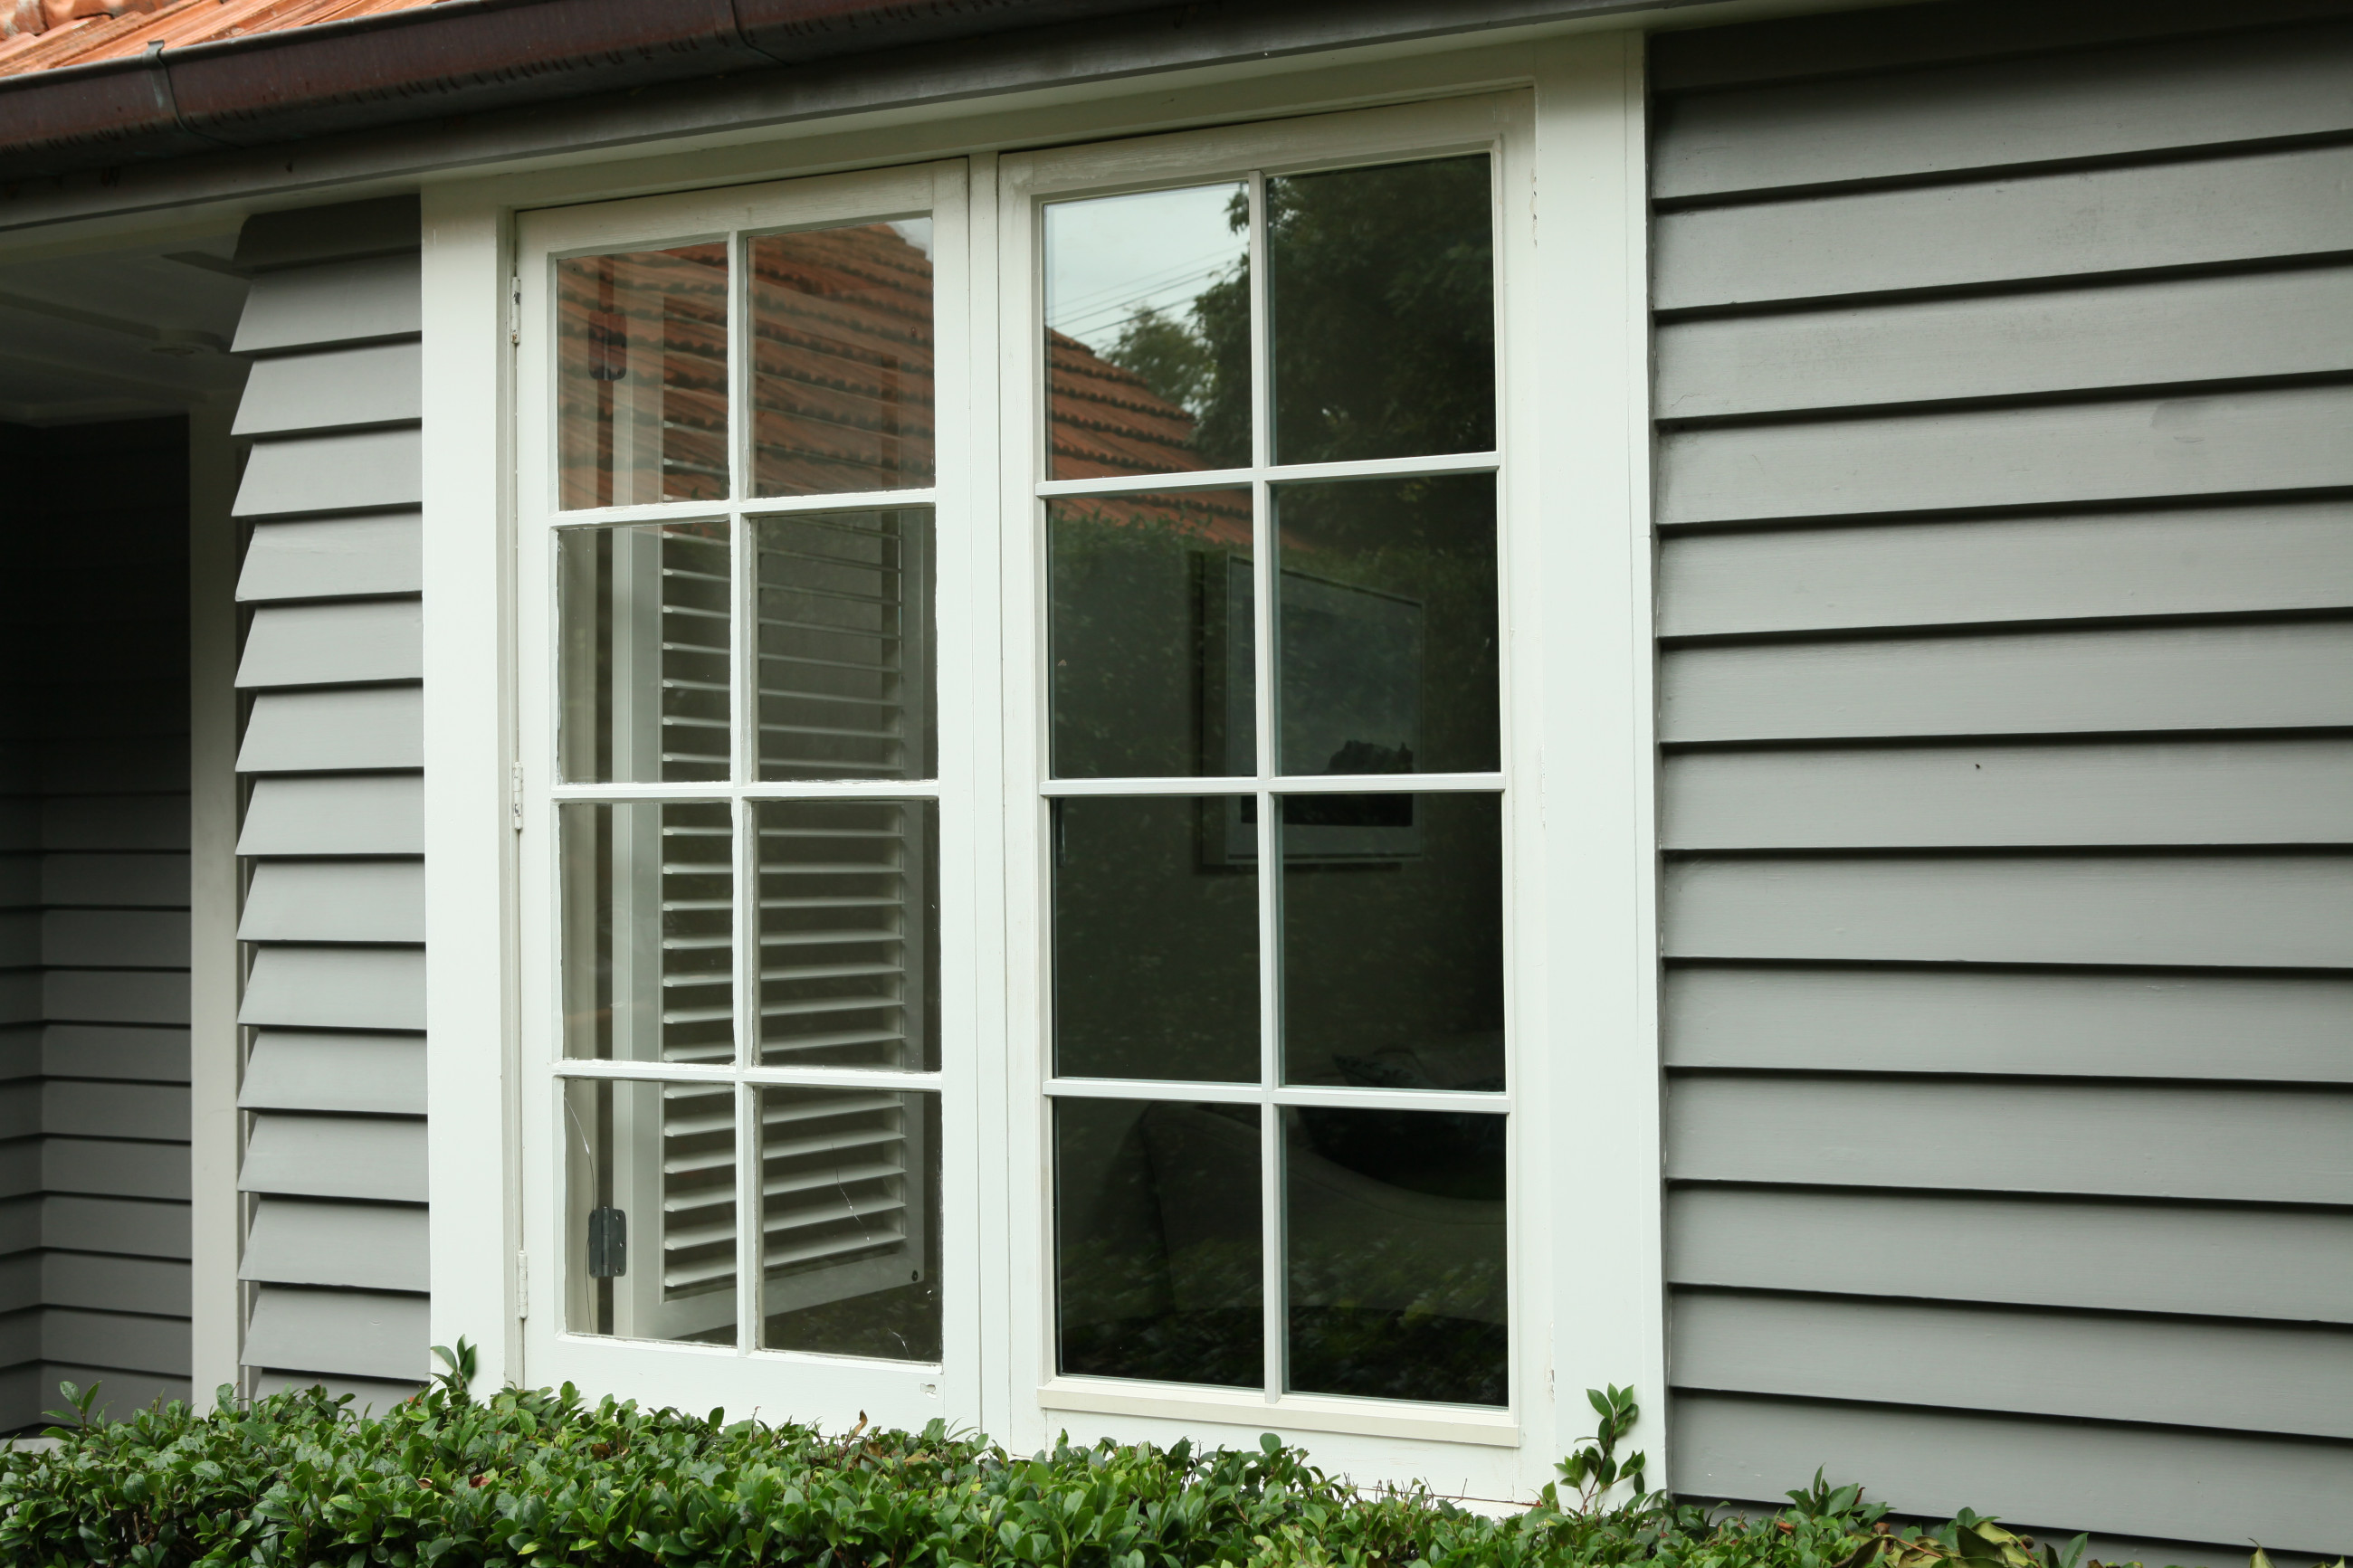 Example of double glazed windows in timber framed